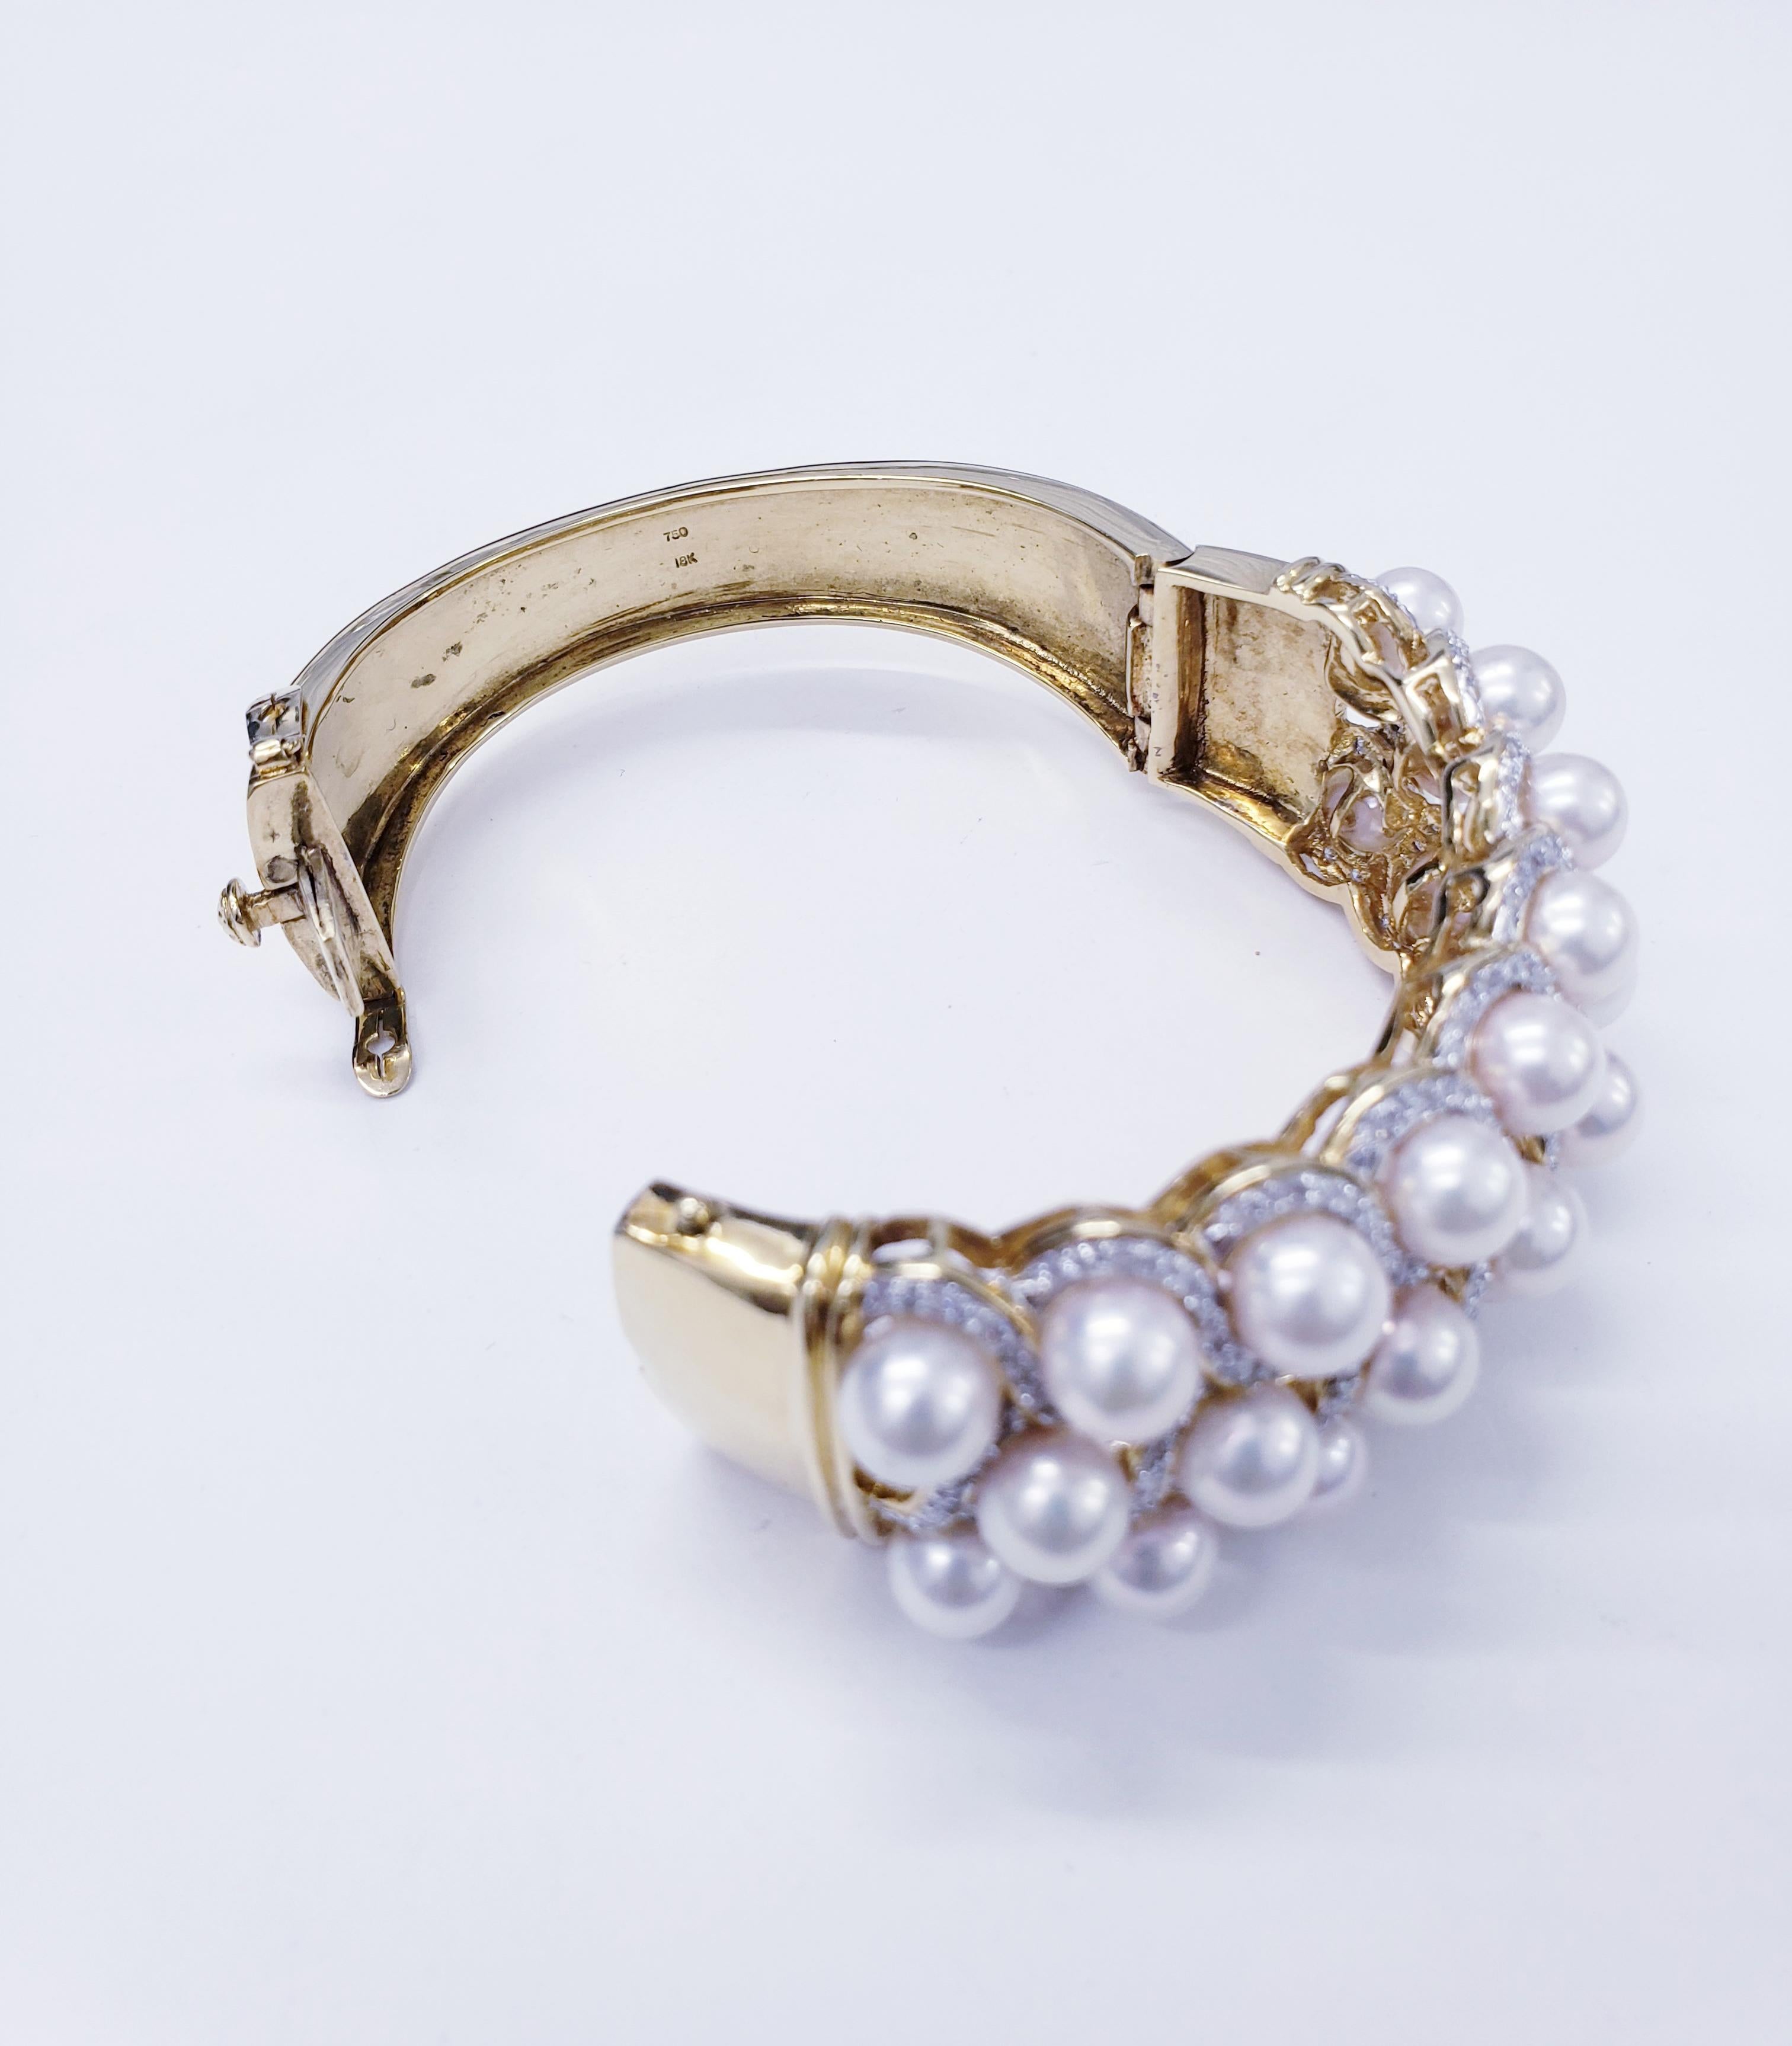 Women's Midcentury Outstanding Luxury Diamonds and Pearls Bangle Handcrafted in 18k Gold For Sale